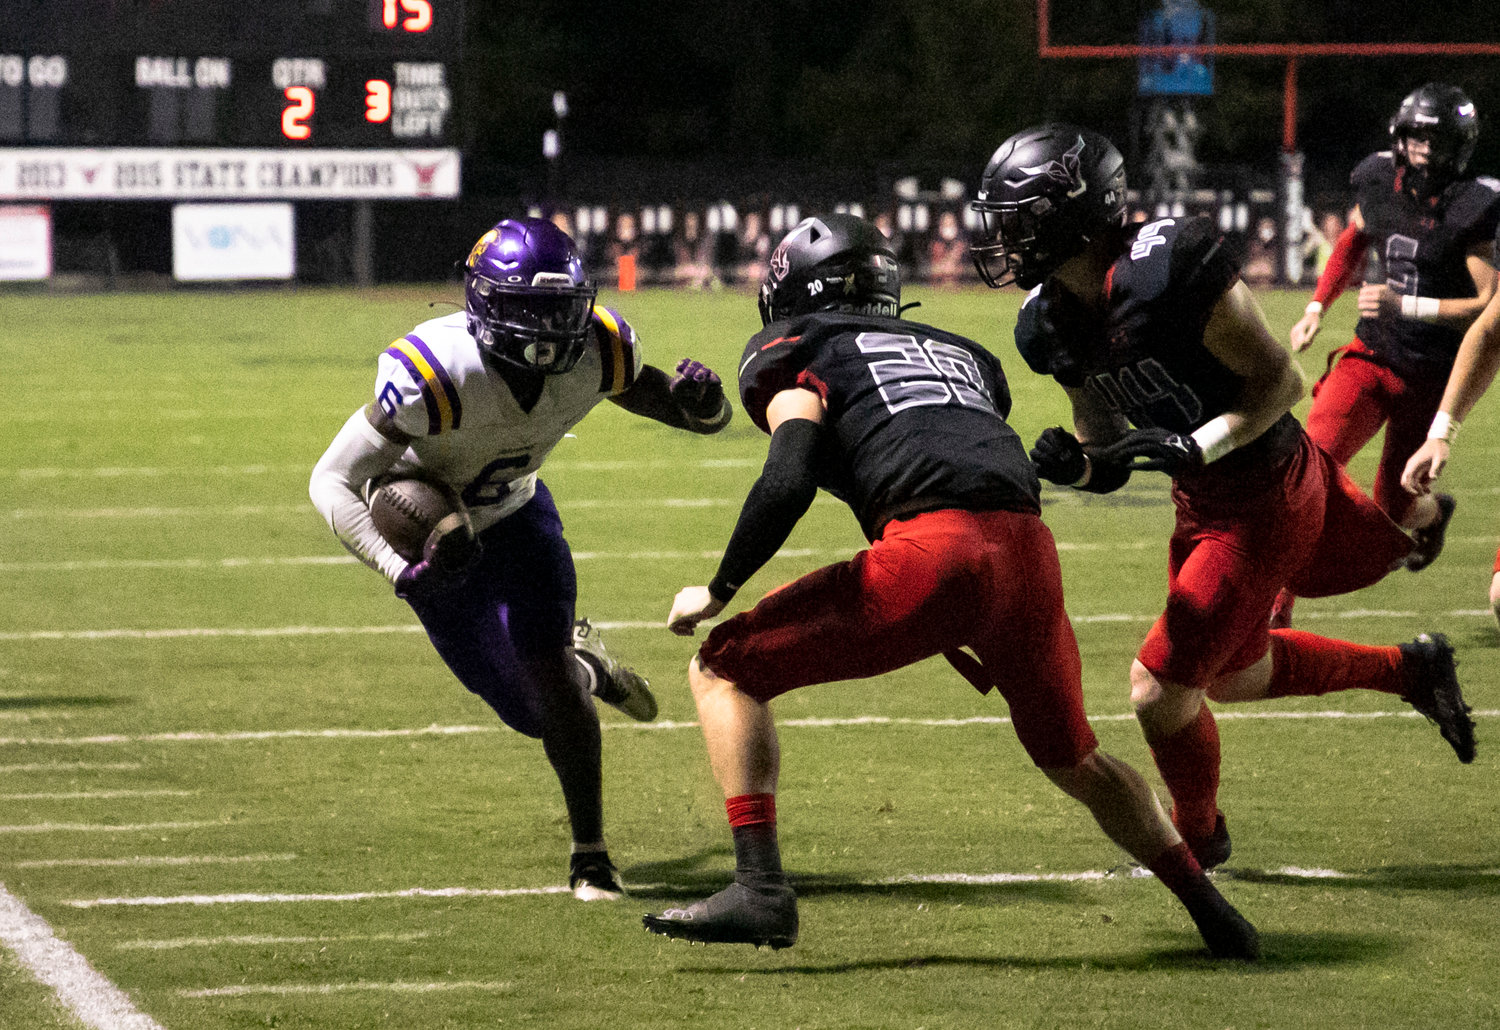 Daphne senior Stephon Blackshear makes a move on the outside after a first-half catch against the Spanish Fort Toros in non-region action Friday night at Spanish Fort Stadium. Blackshear ran for a 12-yard touchdown and caught an 11-yard passing score in the second quarter to give the Trojans an early 15-0 lead on the road.